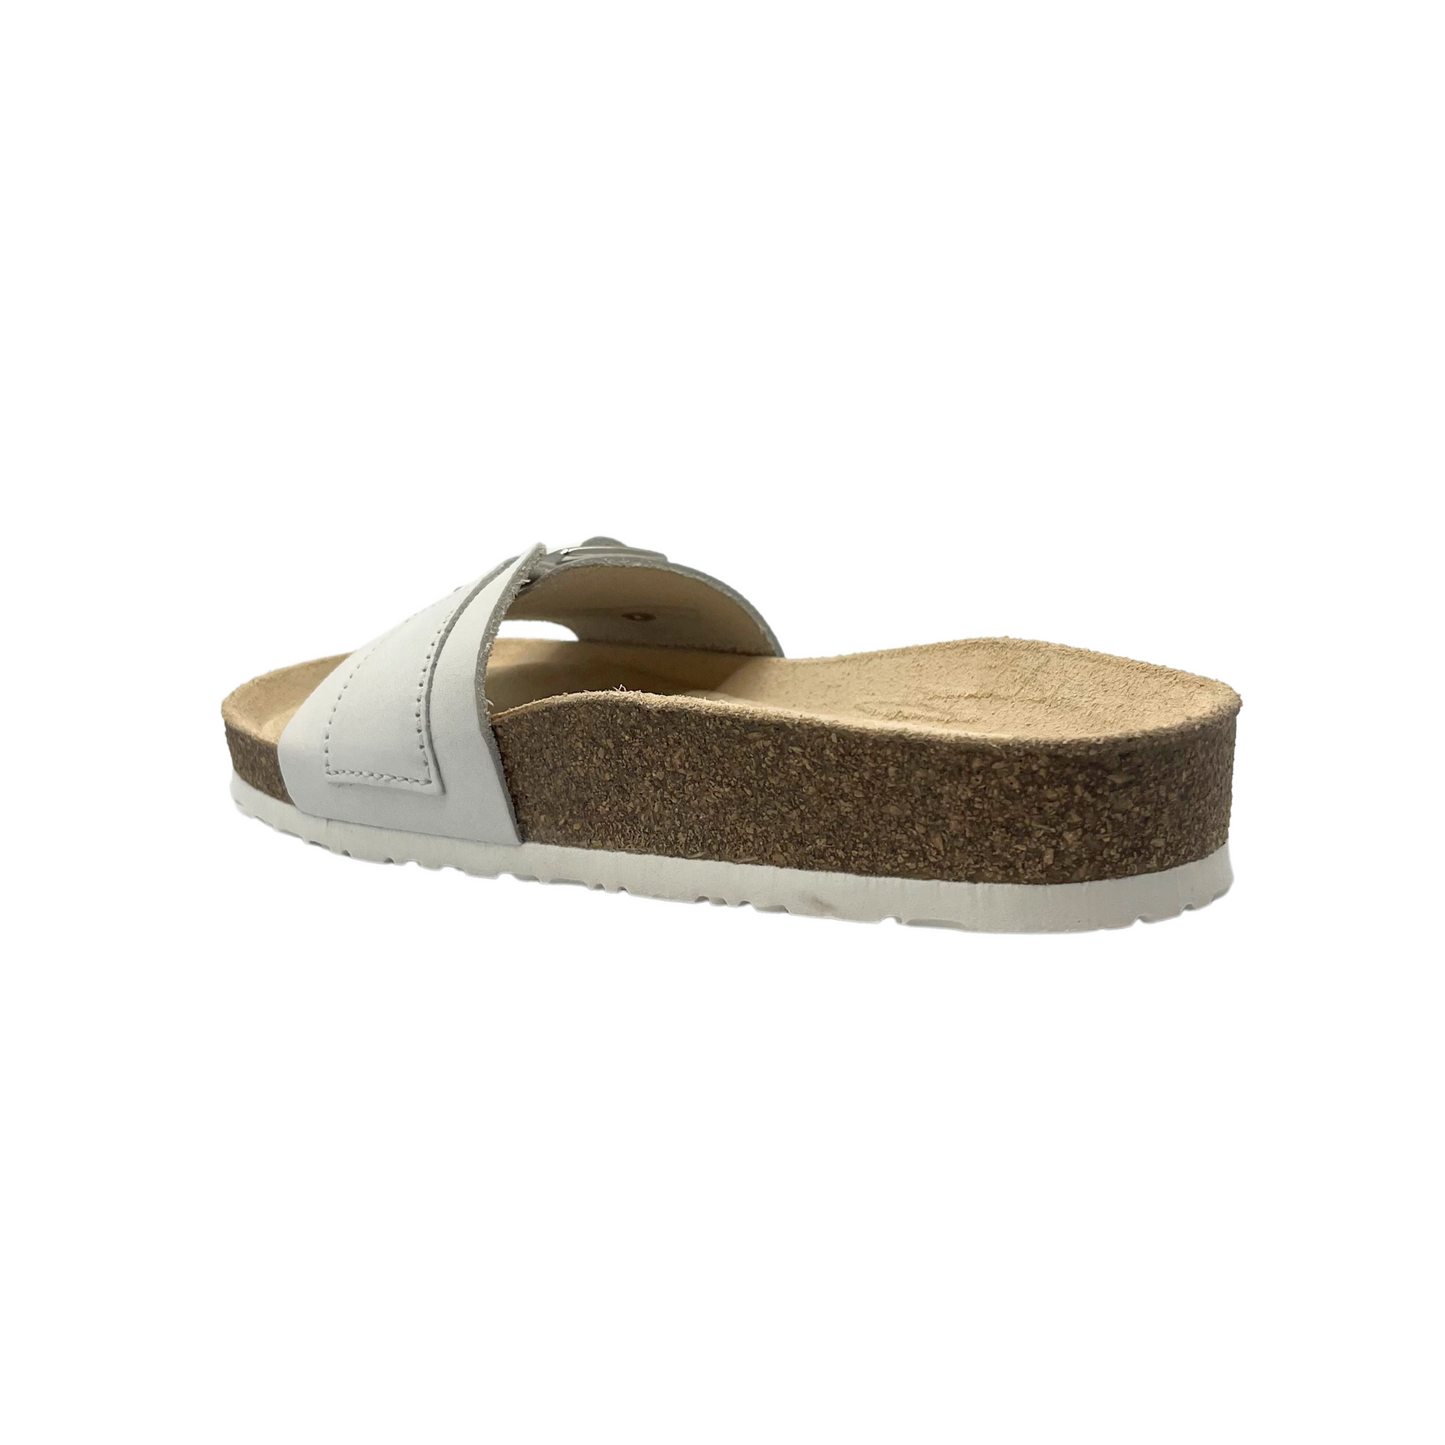 Angled rear view of a white leather walking sandal.  This view shows the leather/cork footbed.  Also shows you the ergonomic shape of the footbed giving great arch support and heel stability